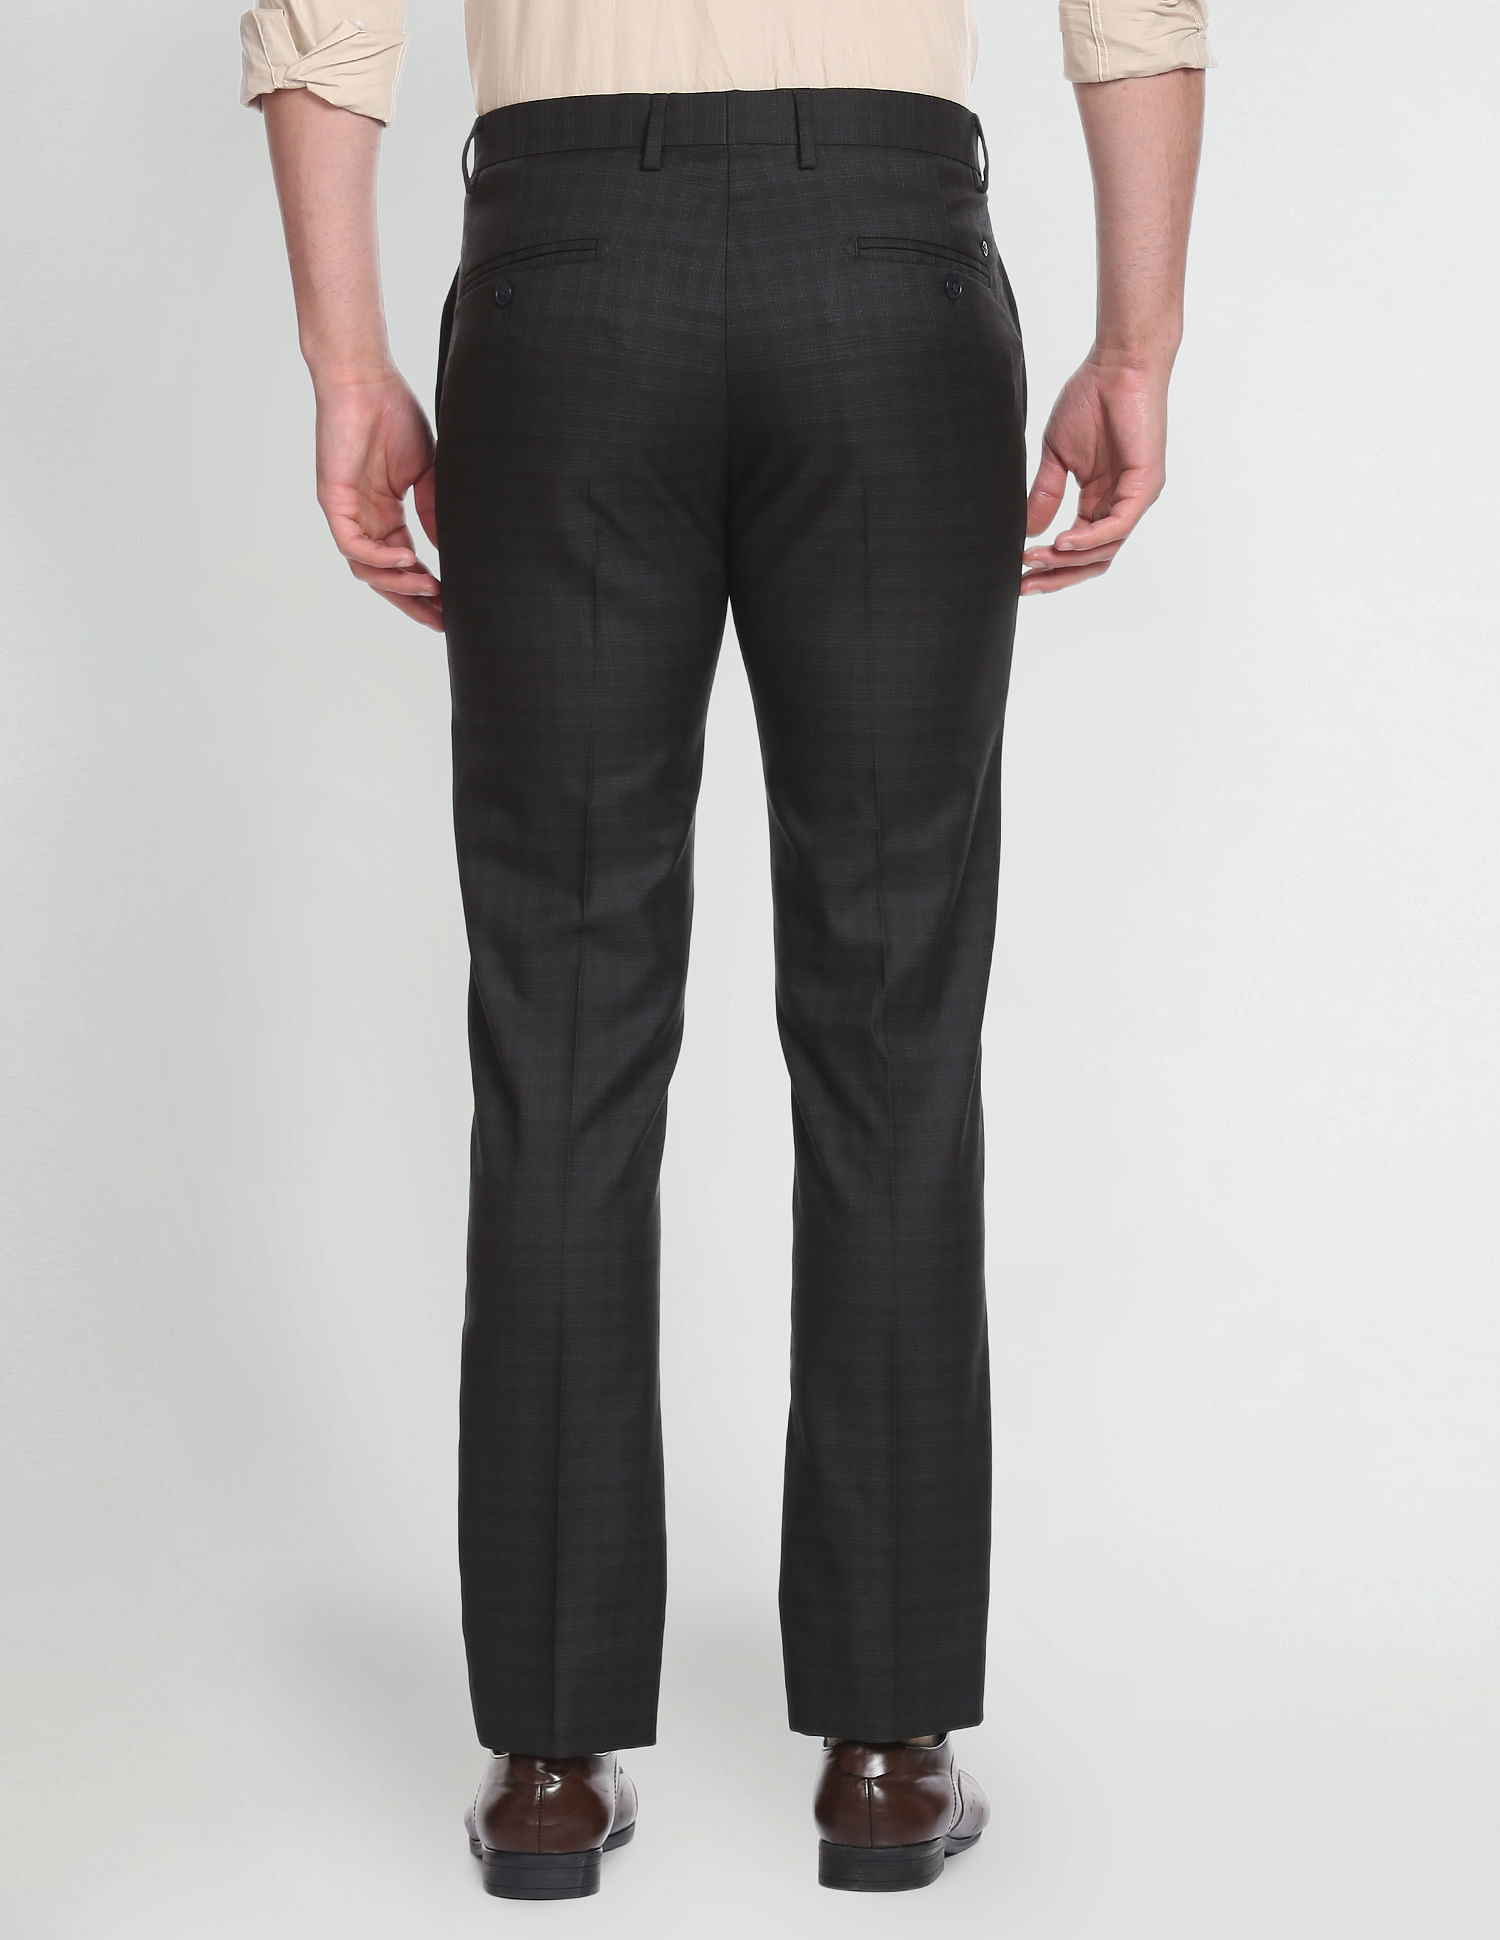 Buy Harry Brown Trousers & Pants online - Men - 51 products | FASHIOLA.in